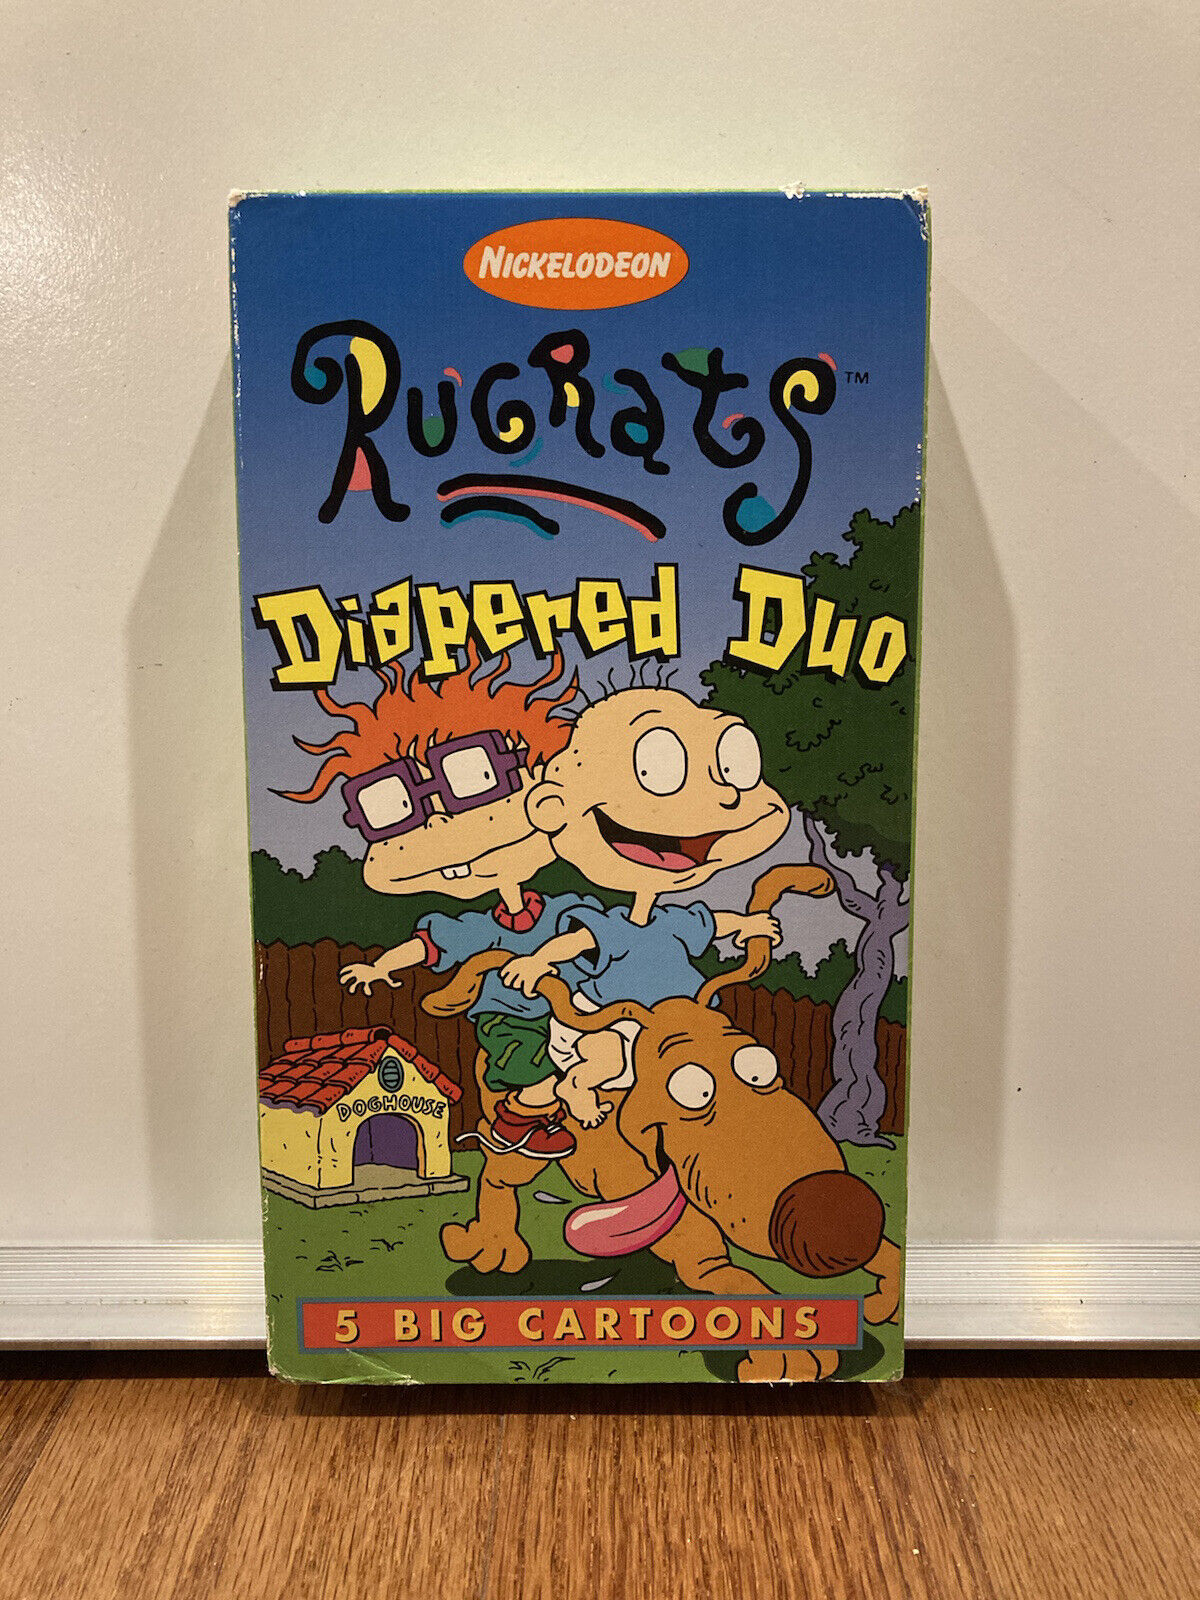 RUGRATS DIAPERED DUO Vhs Video Tape 1998 Animated Nickelodeon Klasky ...